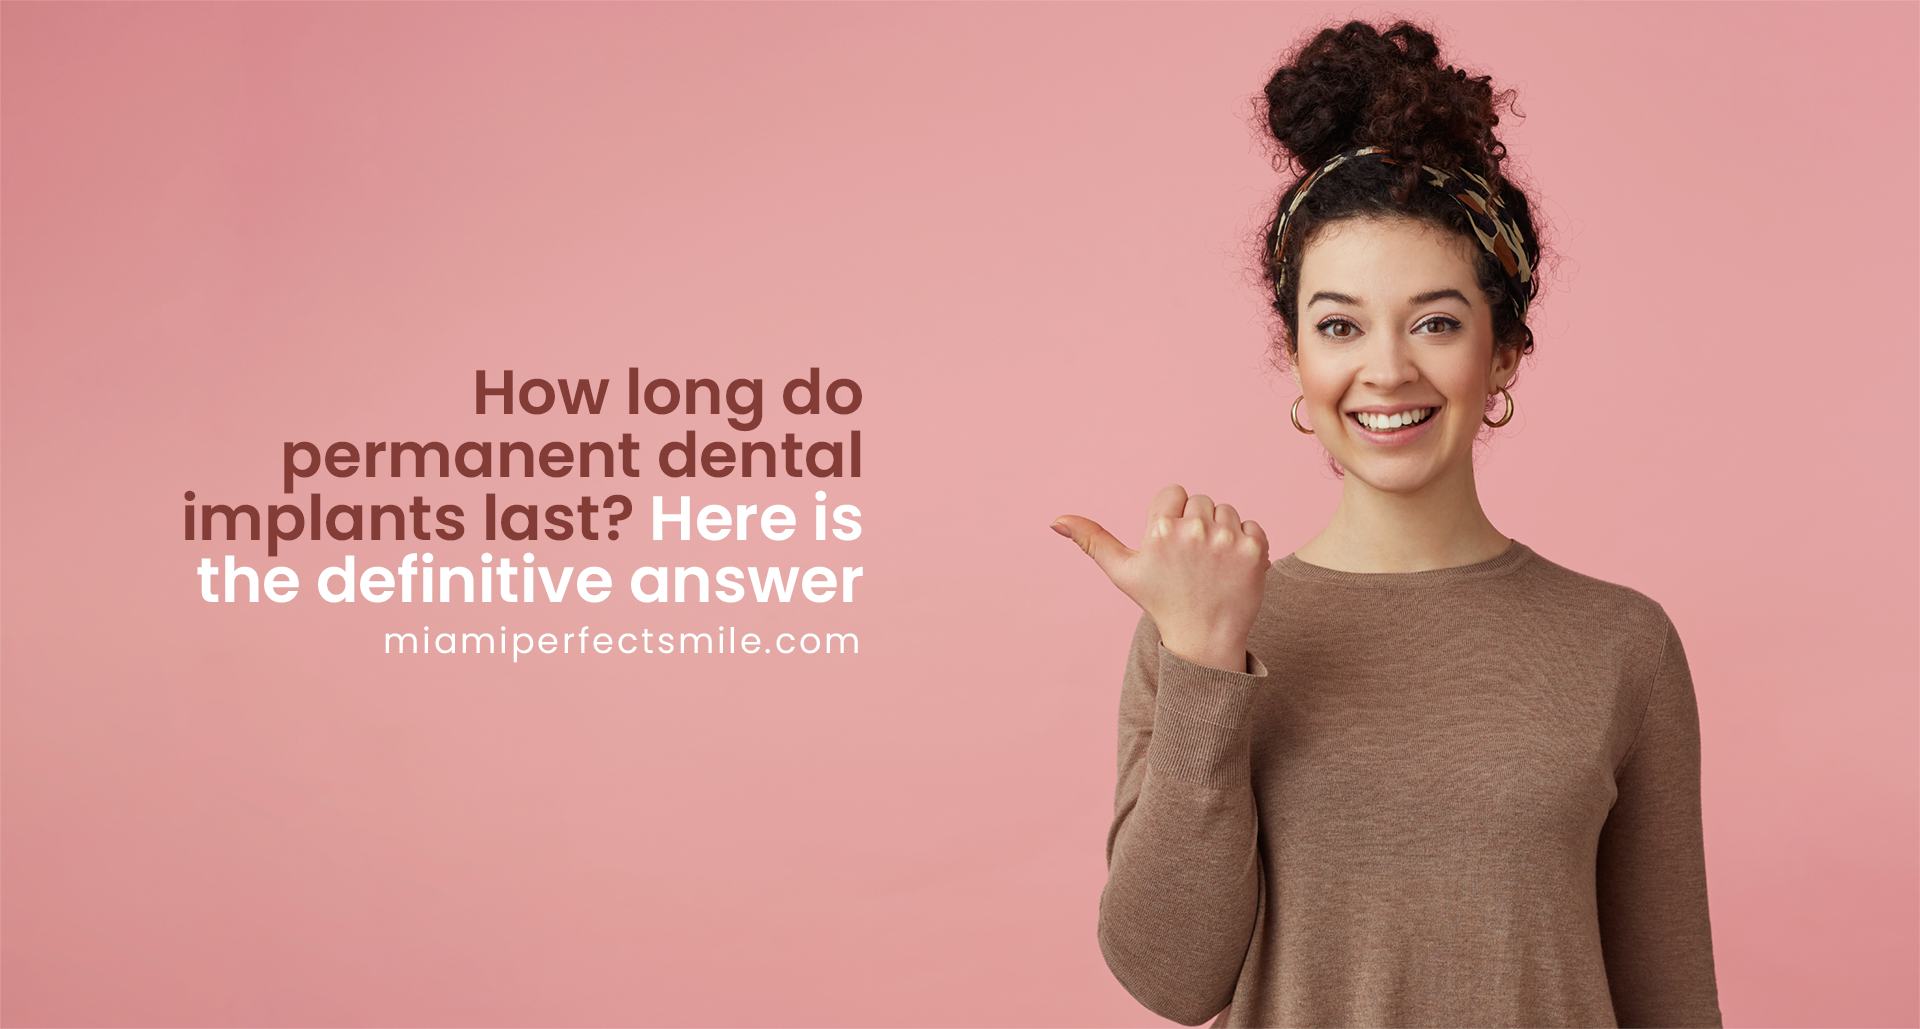 01 How long do permanent dental implants last - Here you have the answer_Miami Perfect Smile